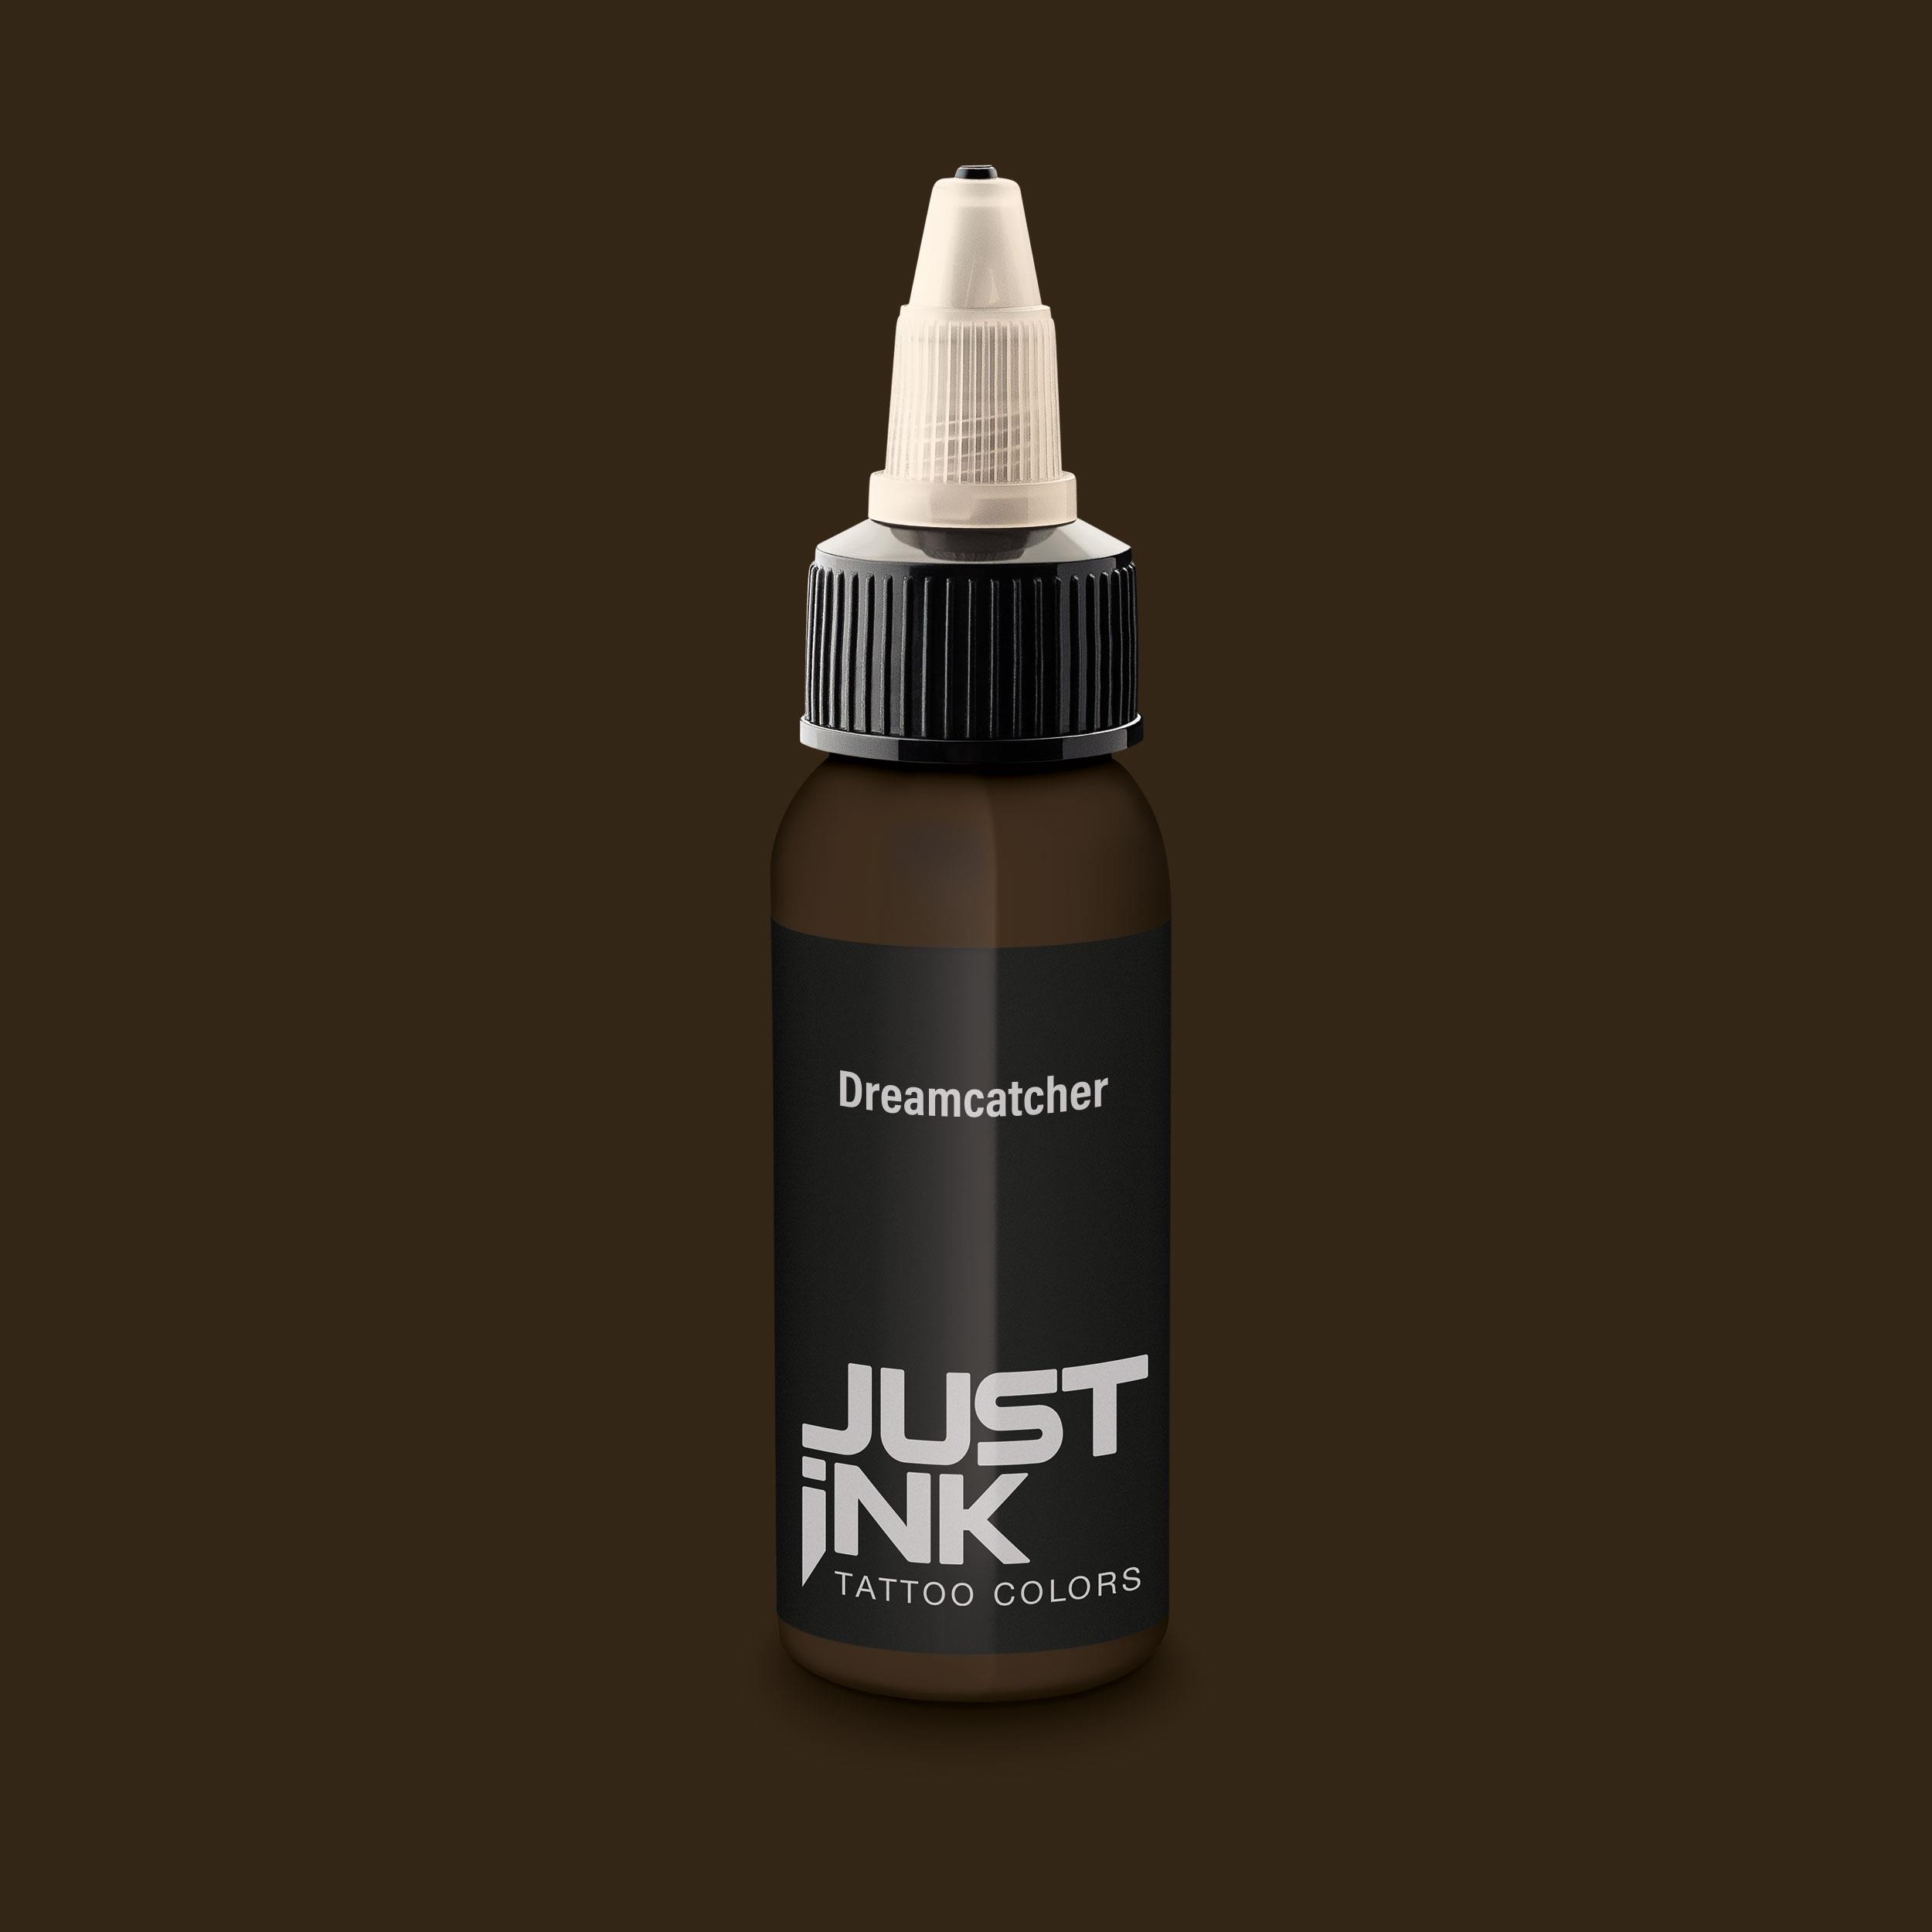 Love My Ink Tattoo Aftercare Spray - Tattoo Care Spray | MAKEUP